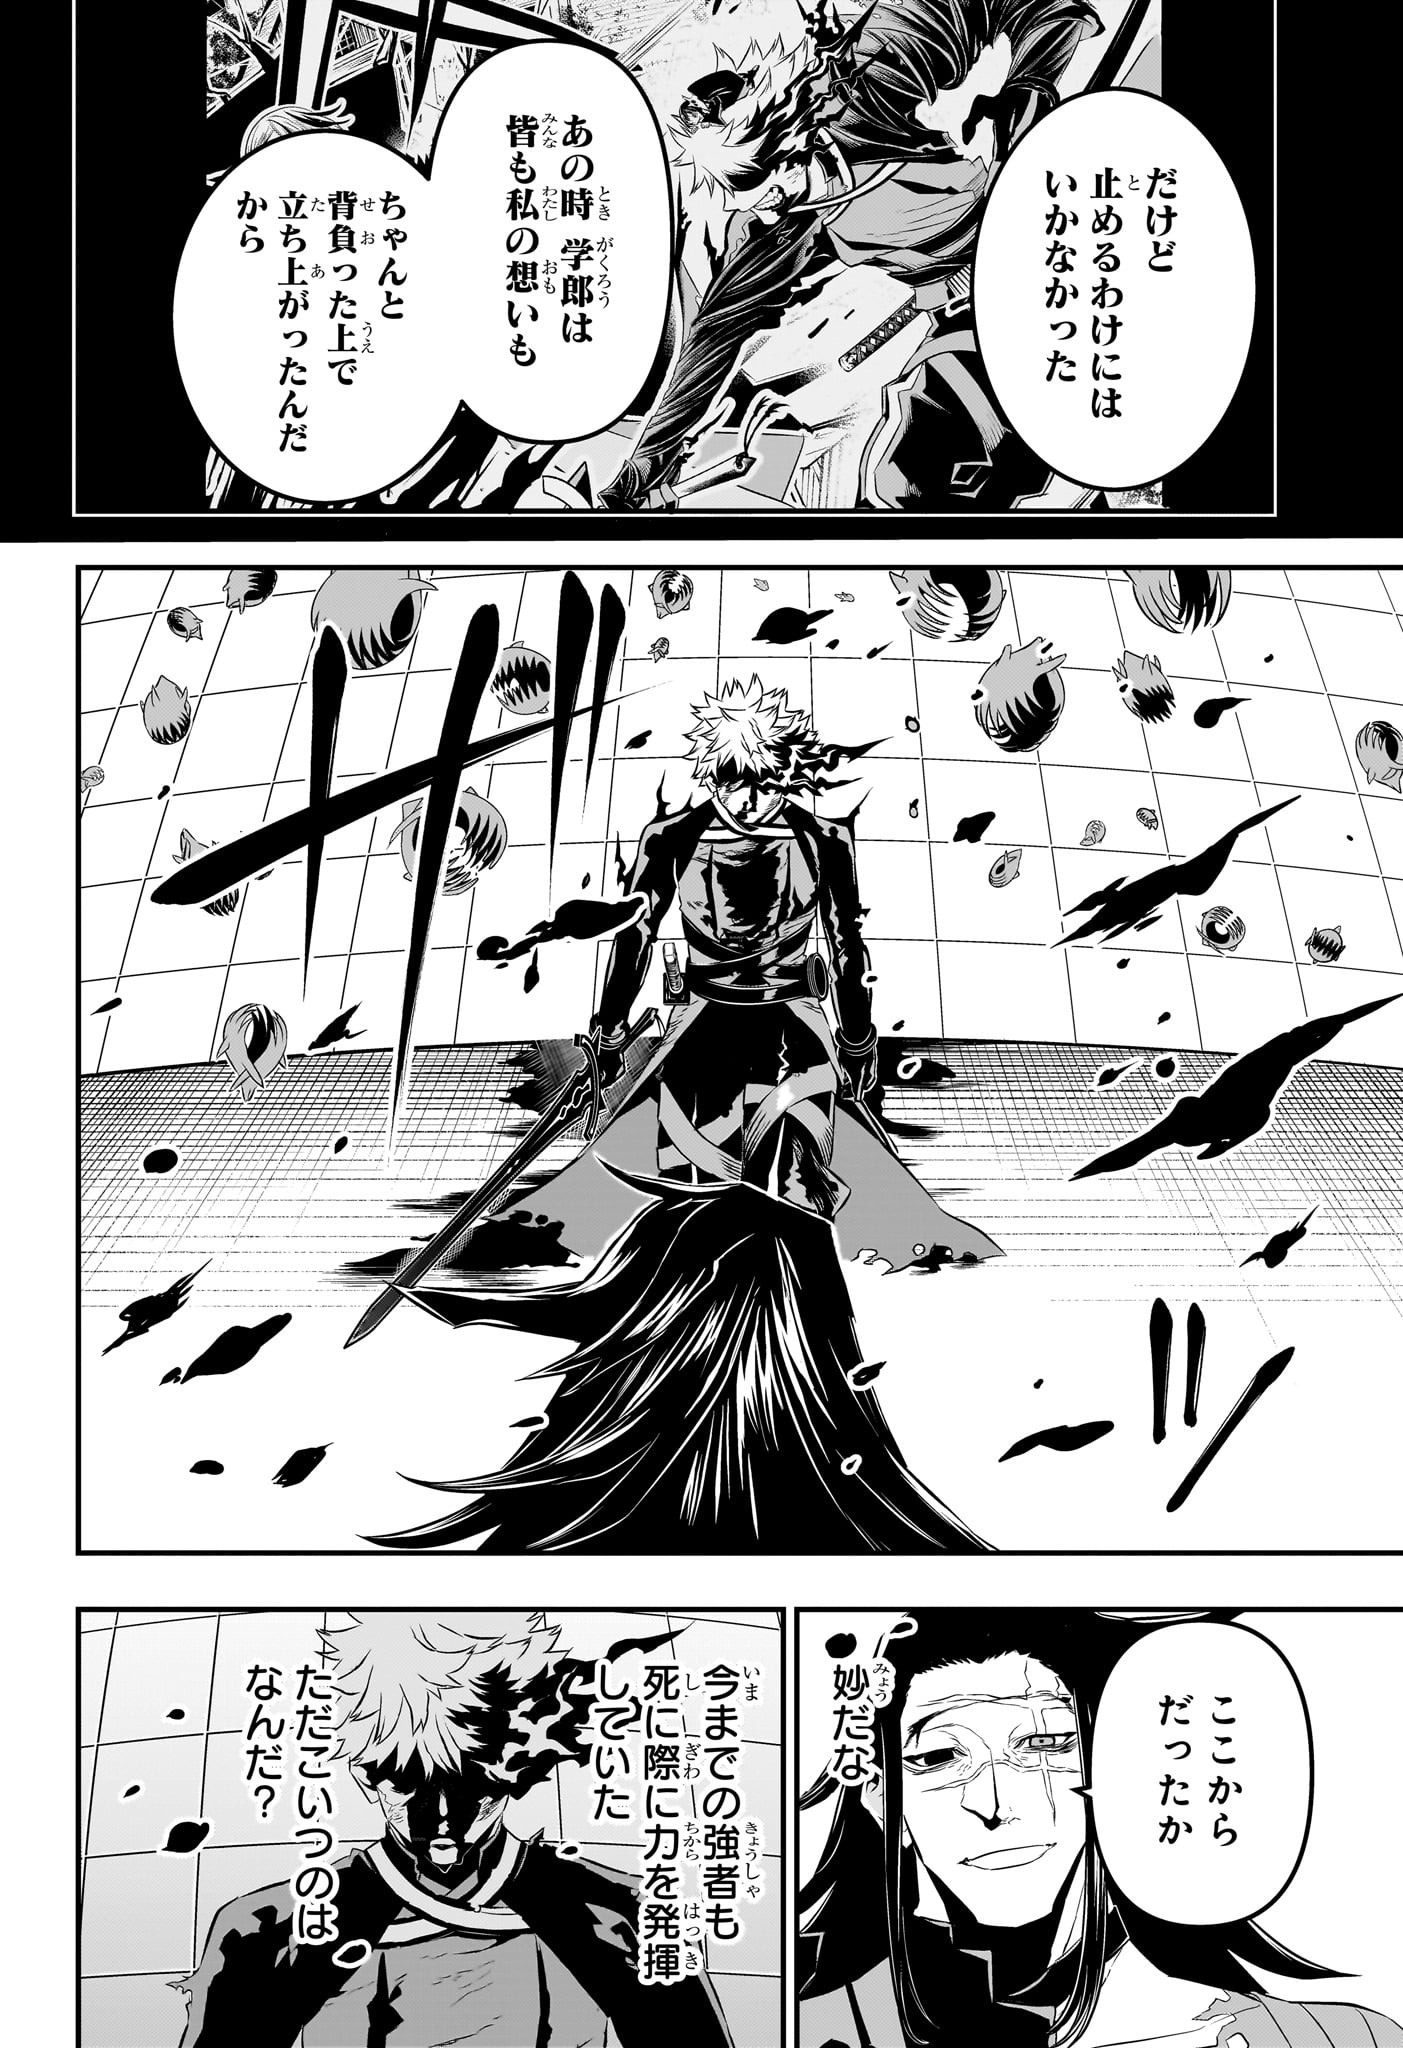 Nue no Onmyouji - Chapter 55 - Page 2